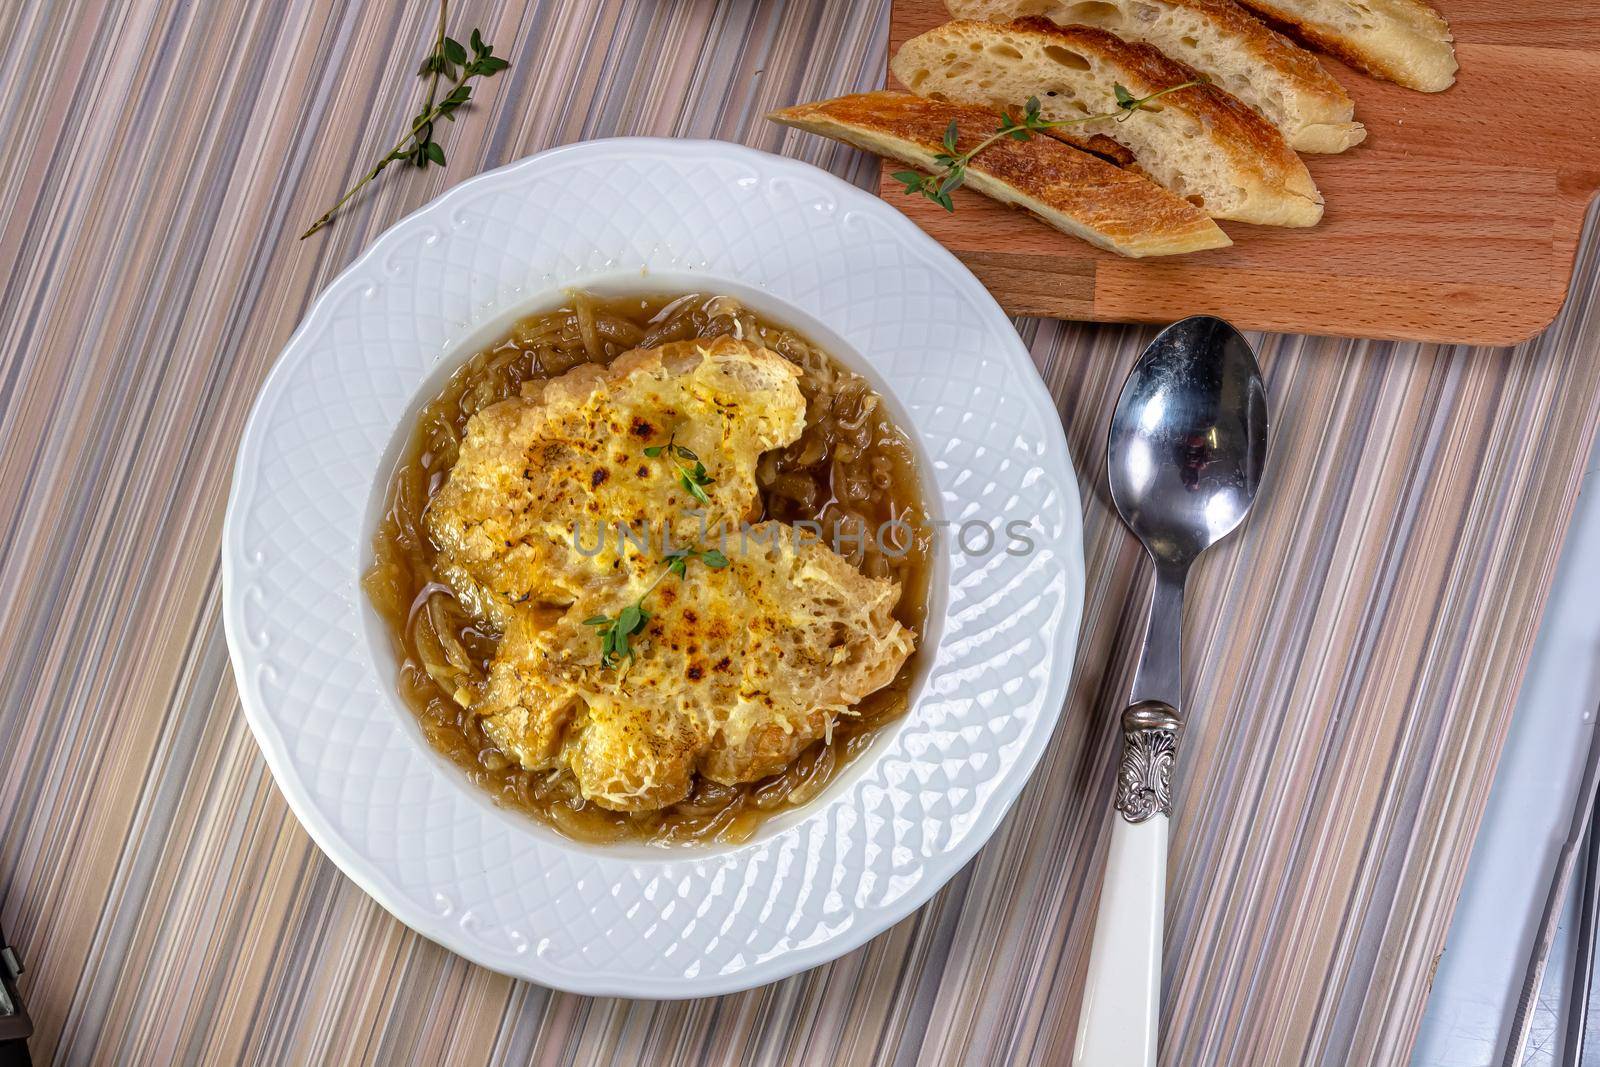 Classic French onion soup baked with cheese croutons by Milanchikov